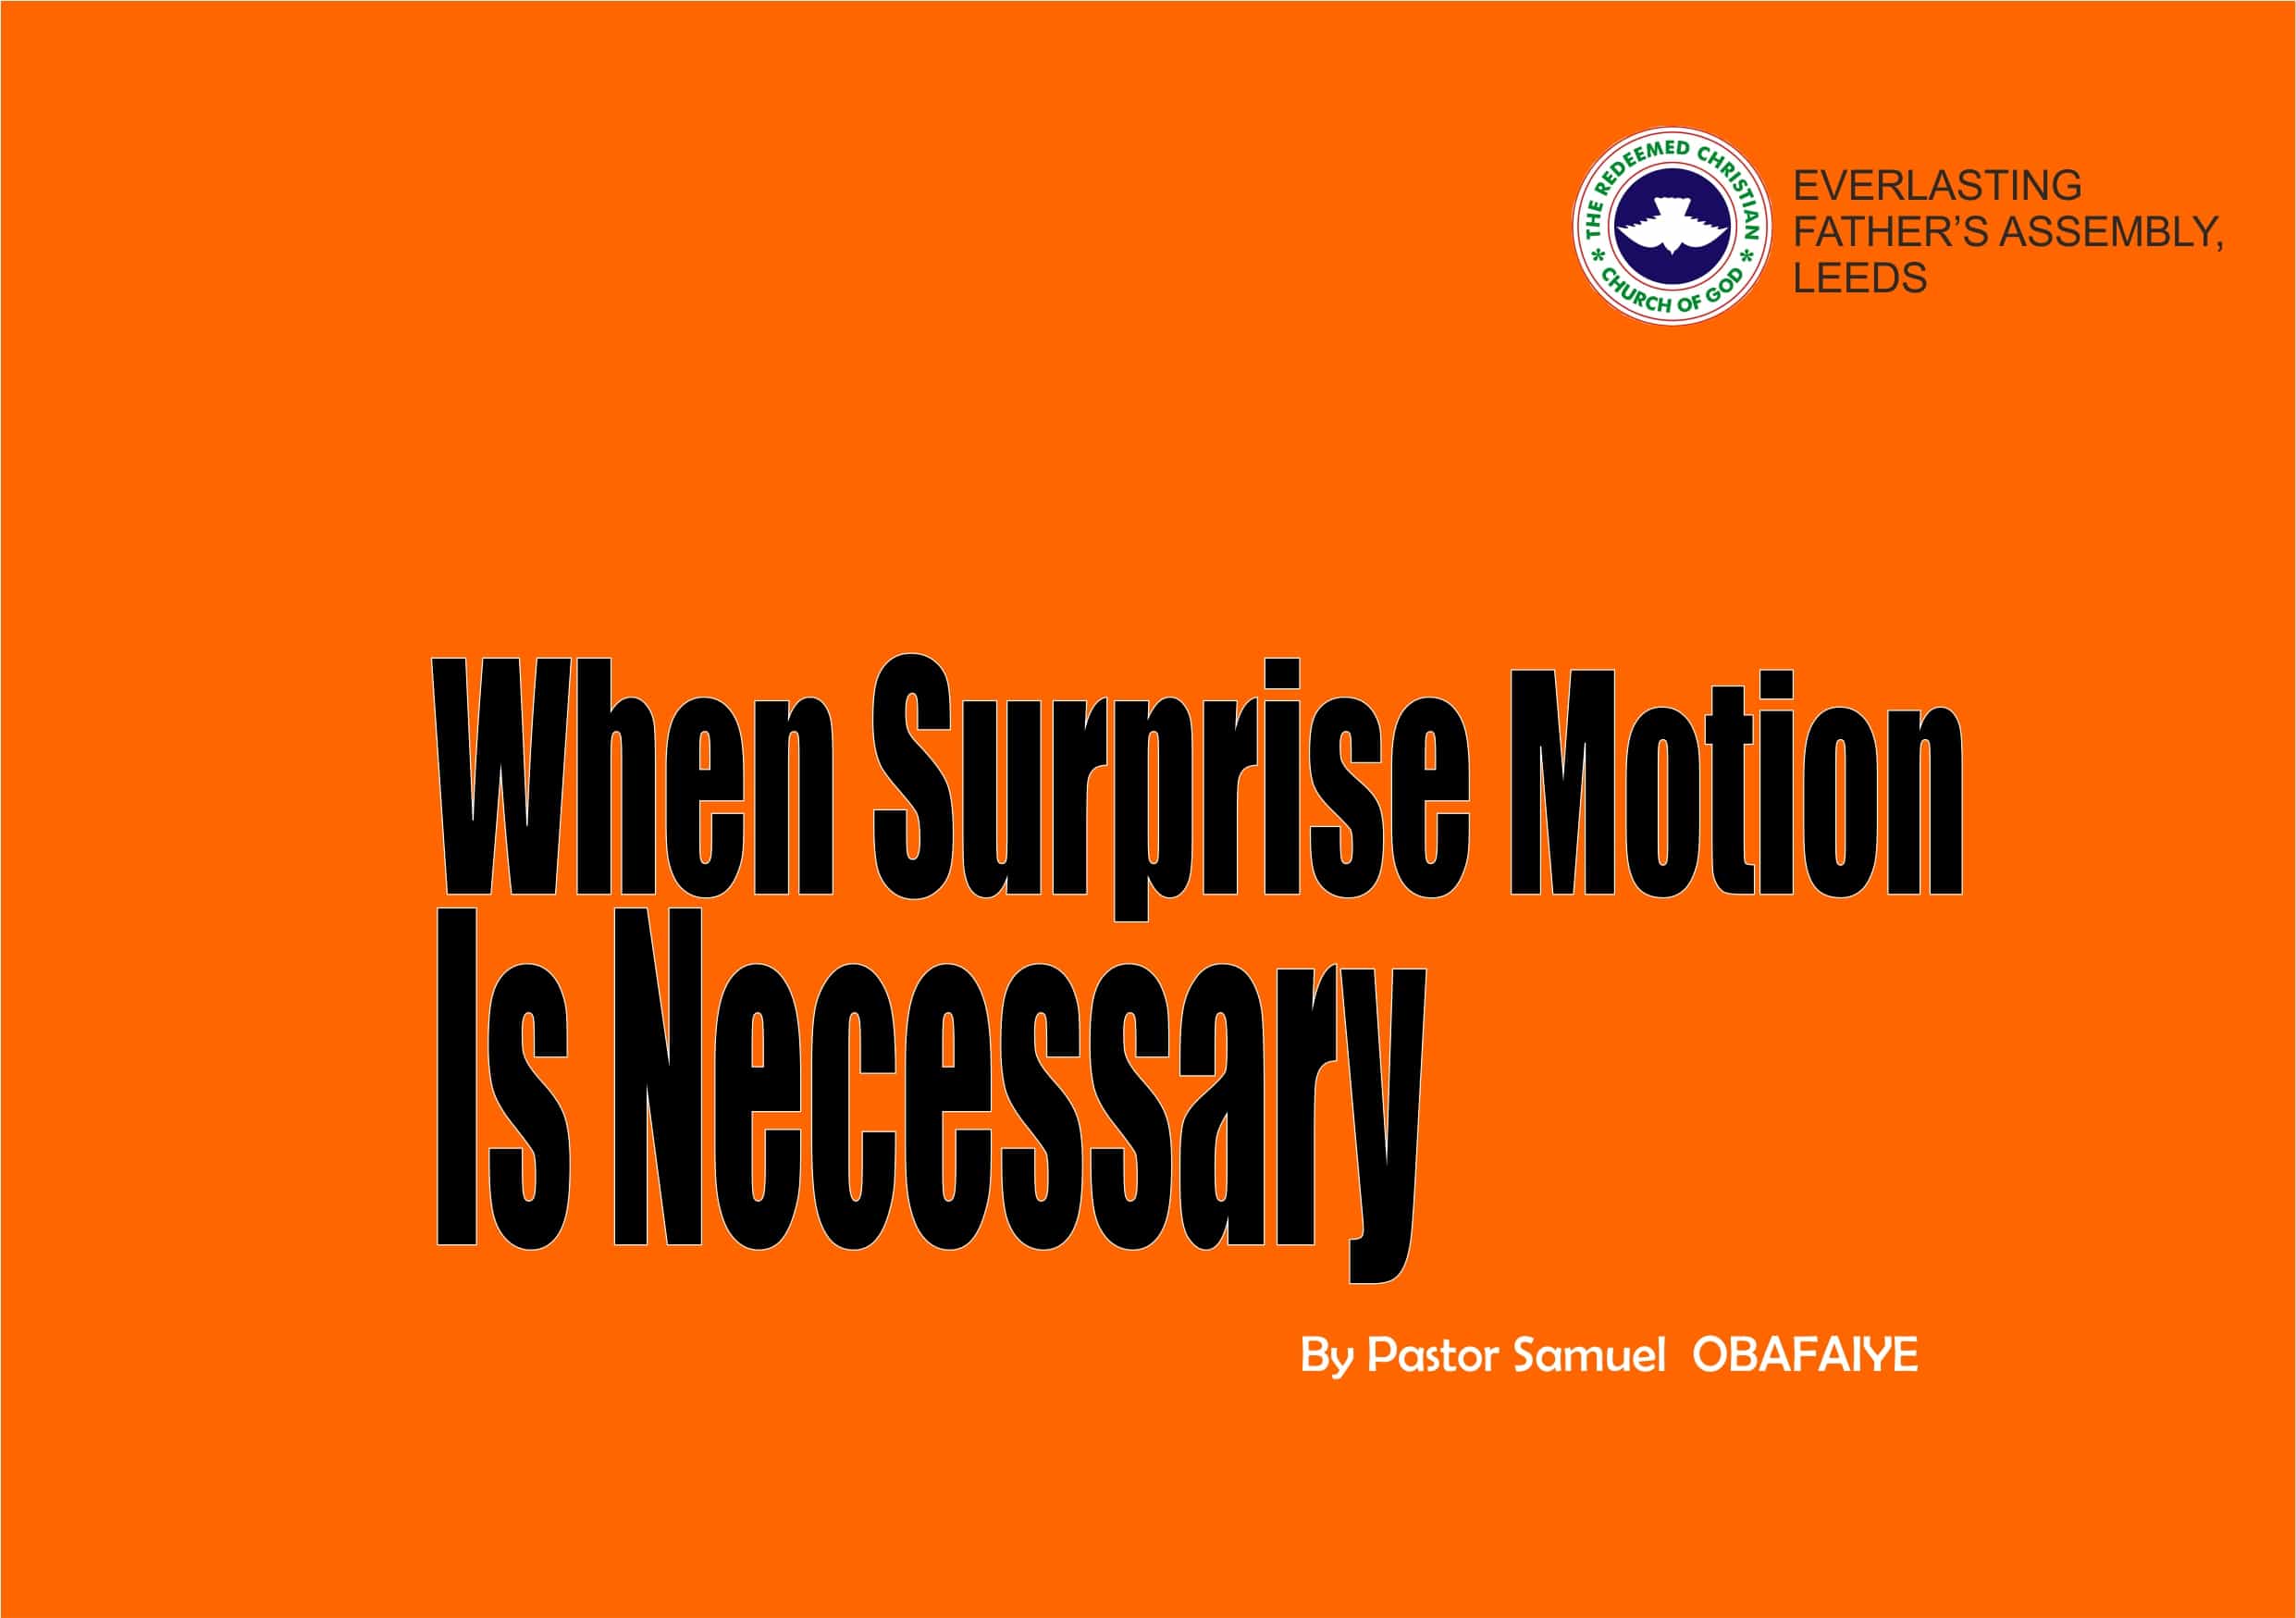 When Surprise Motion Is Necessary, by Pastor Samuel Obafaiye